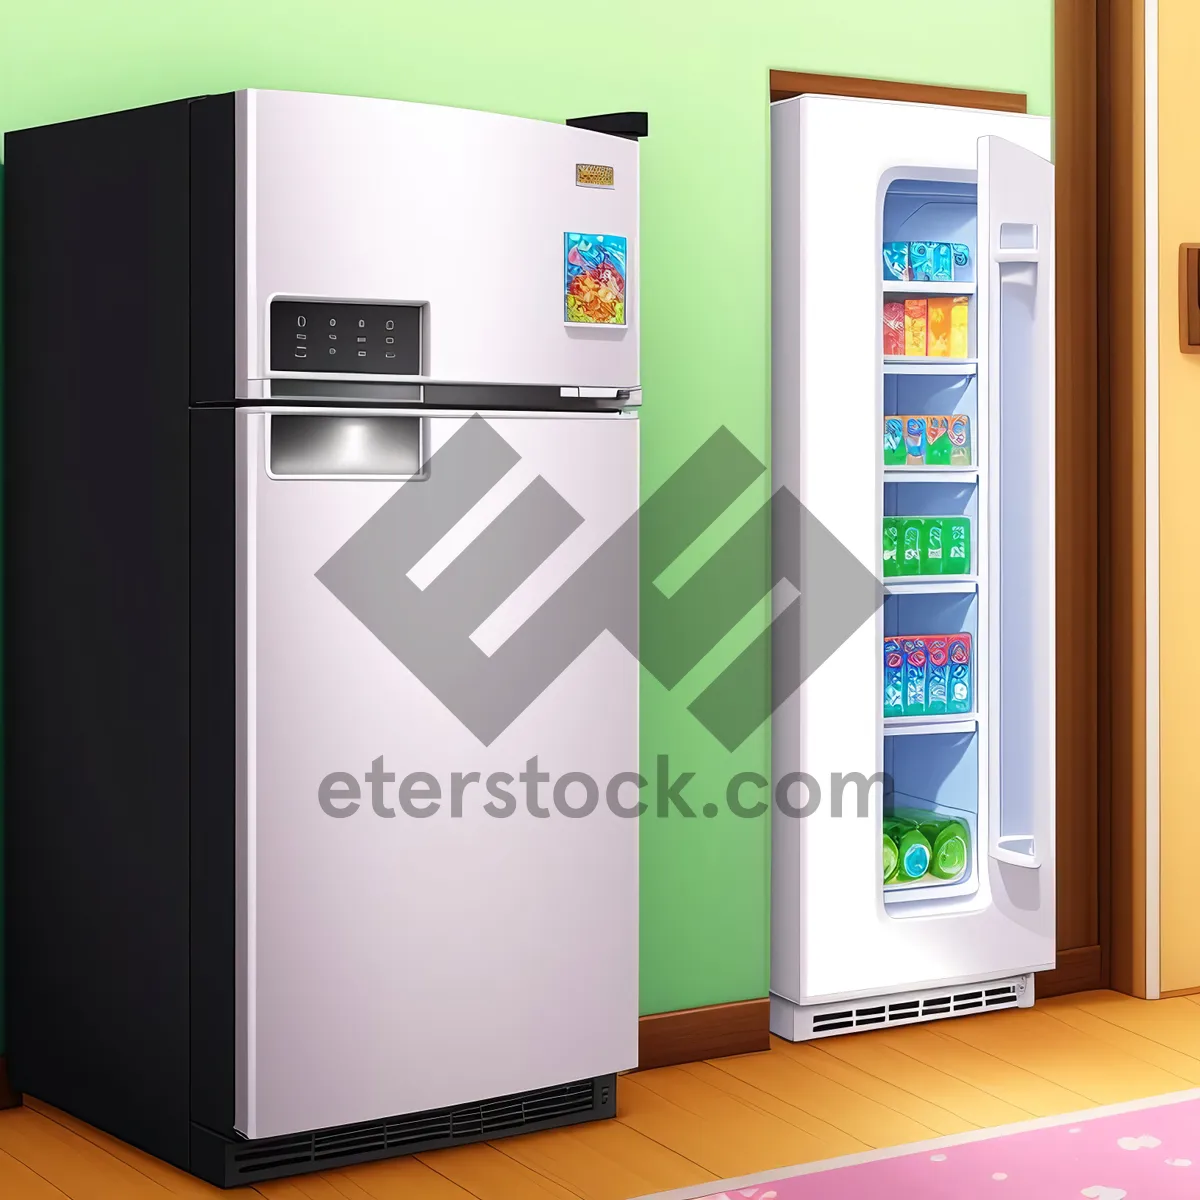 Picture of White Goods Refrigeration System - Home Appliance 3D Mechanism